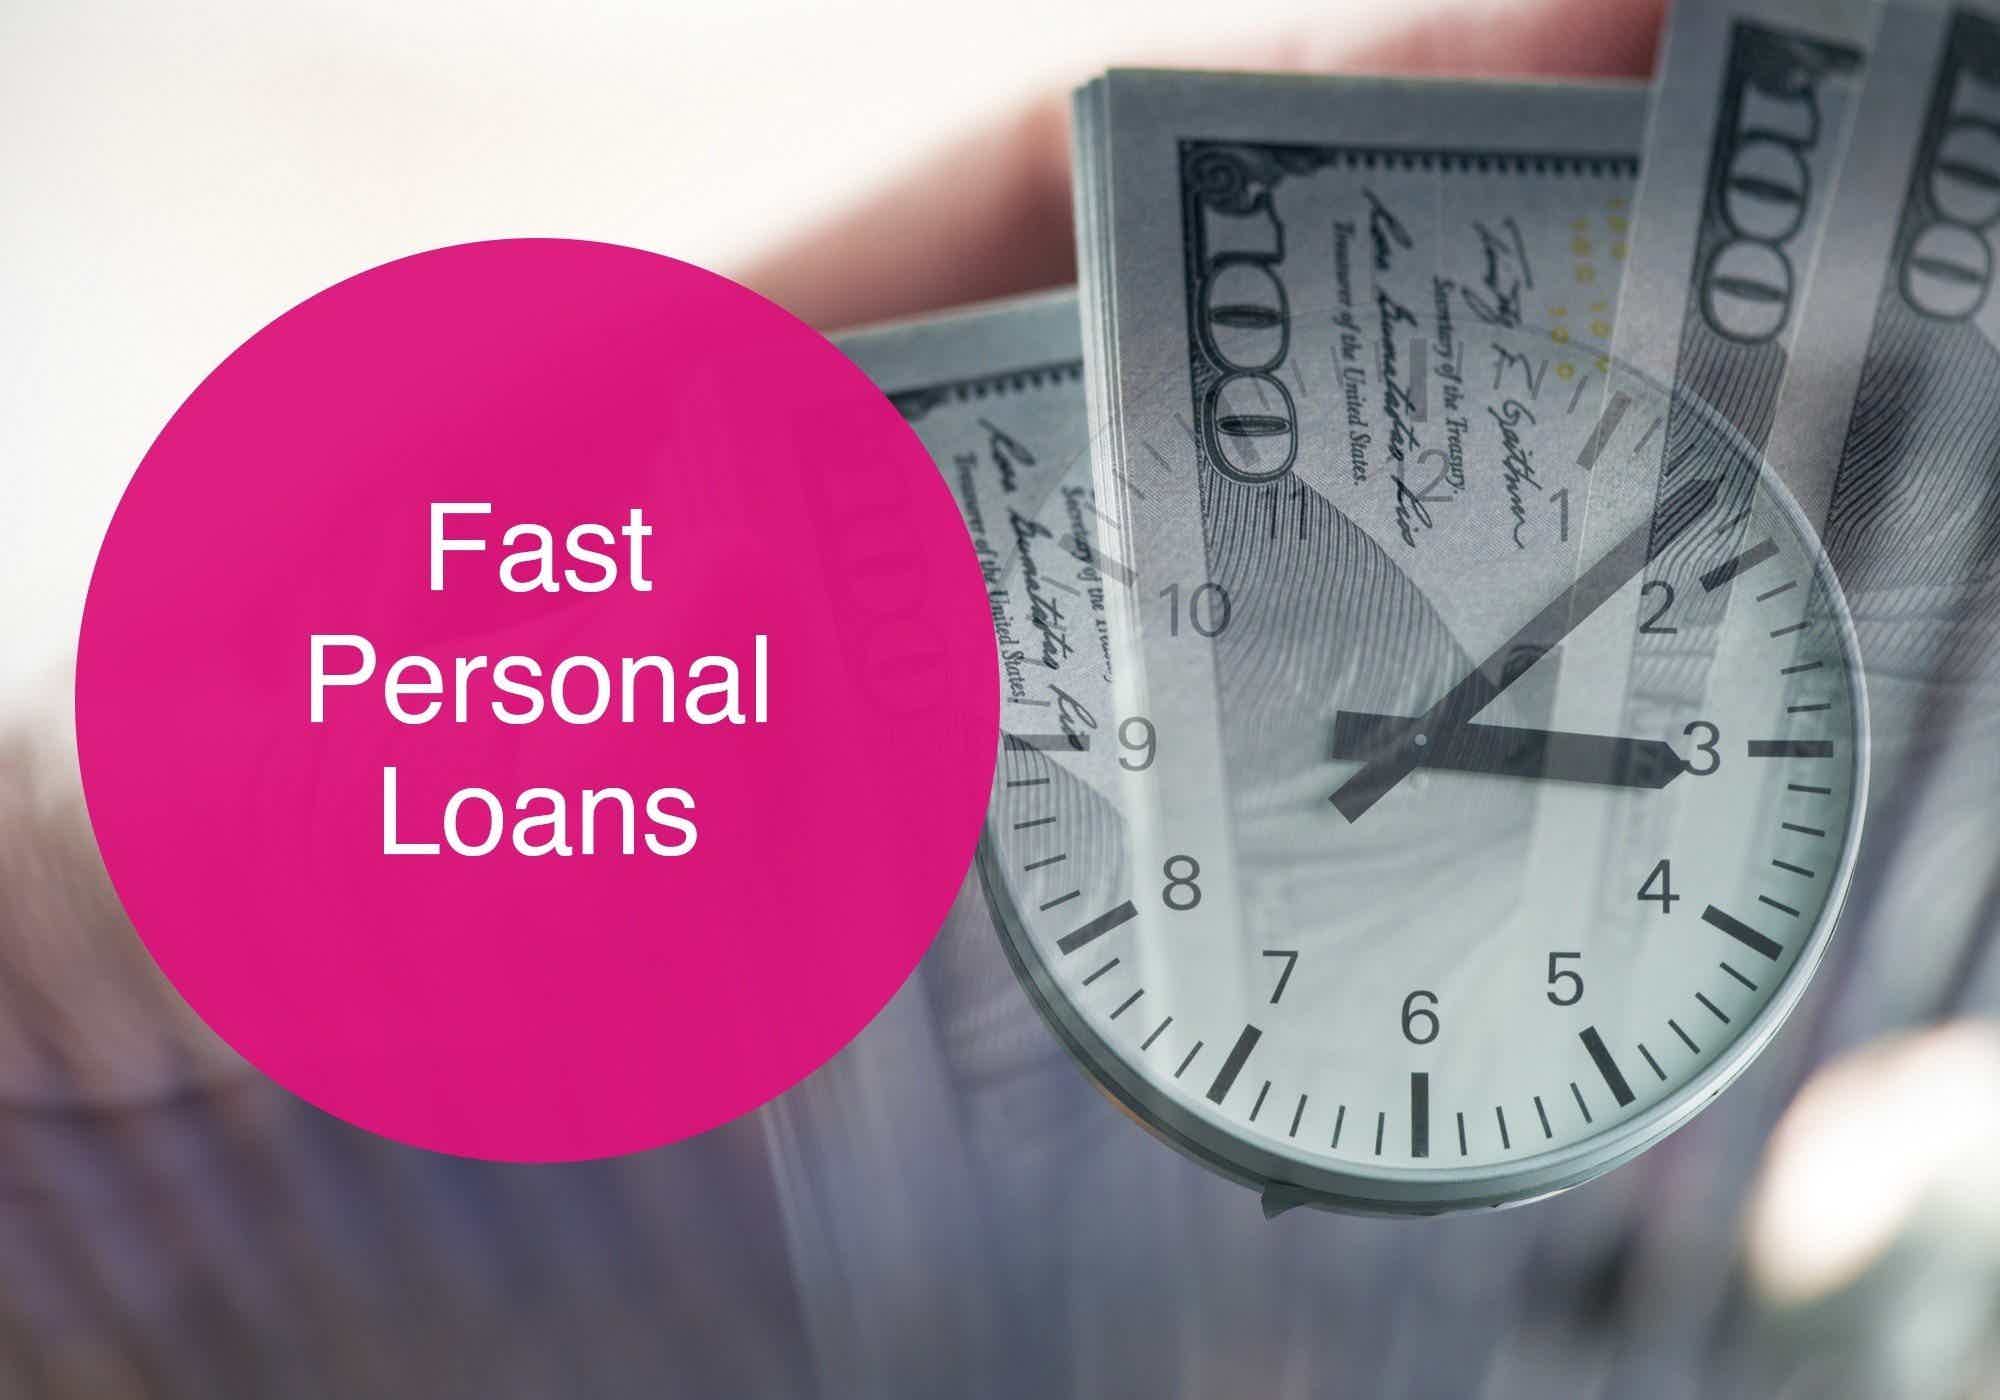 See how to apply online to get a personal loan. Source: Prosper Marketplace.